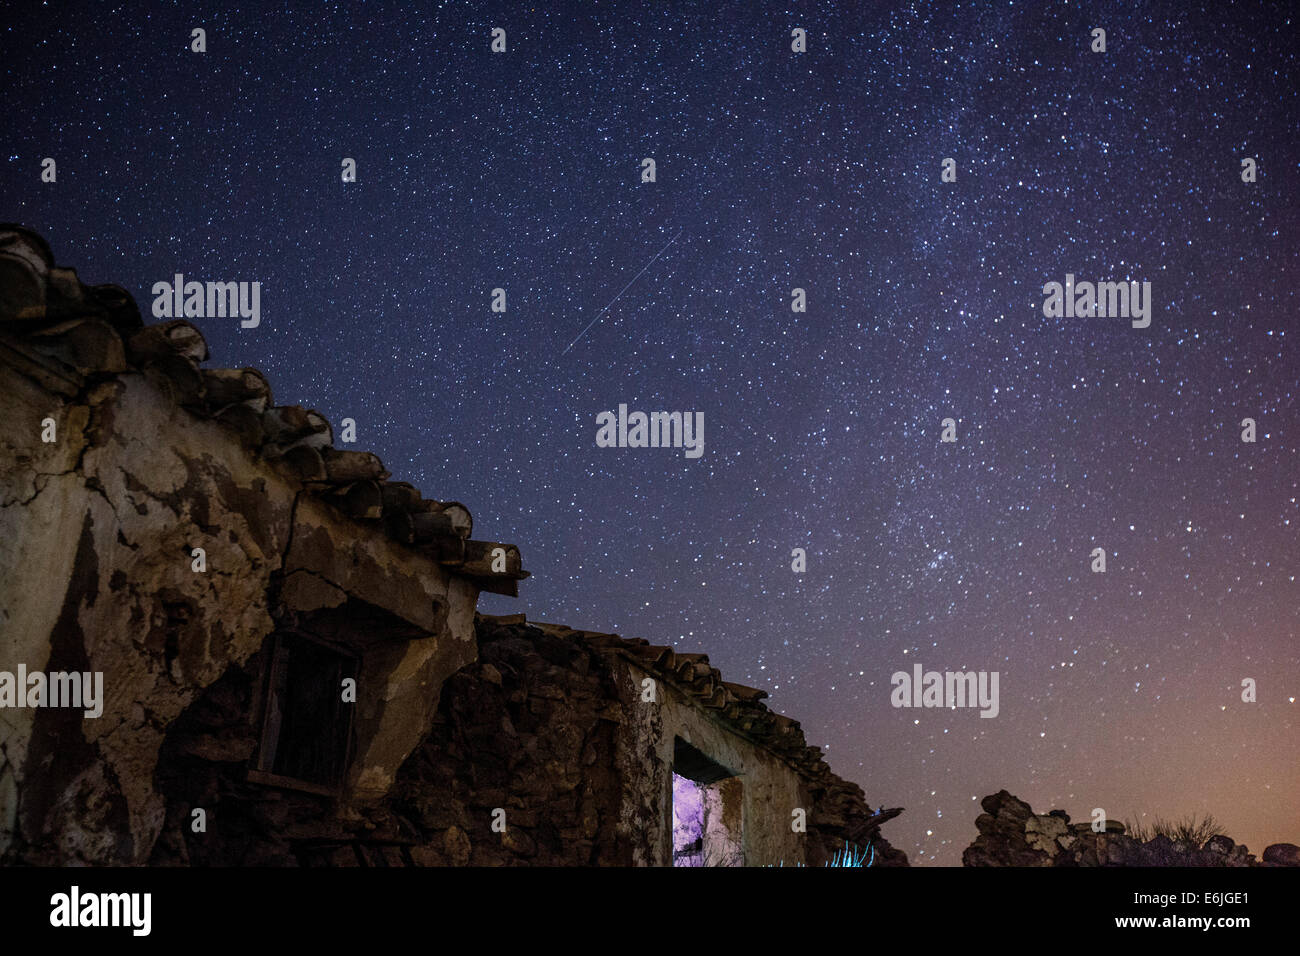 The milky way star formation above old and abandoned building ruins in Spain at Night. Capturing a shooting star Stock Photo